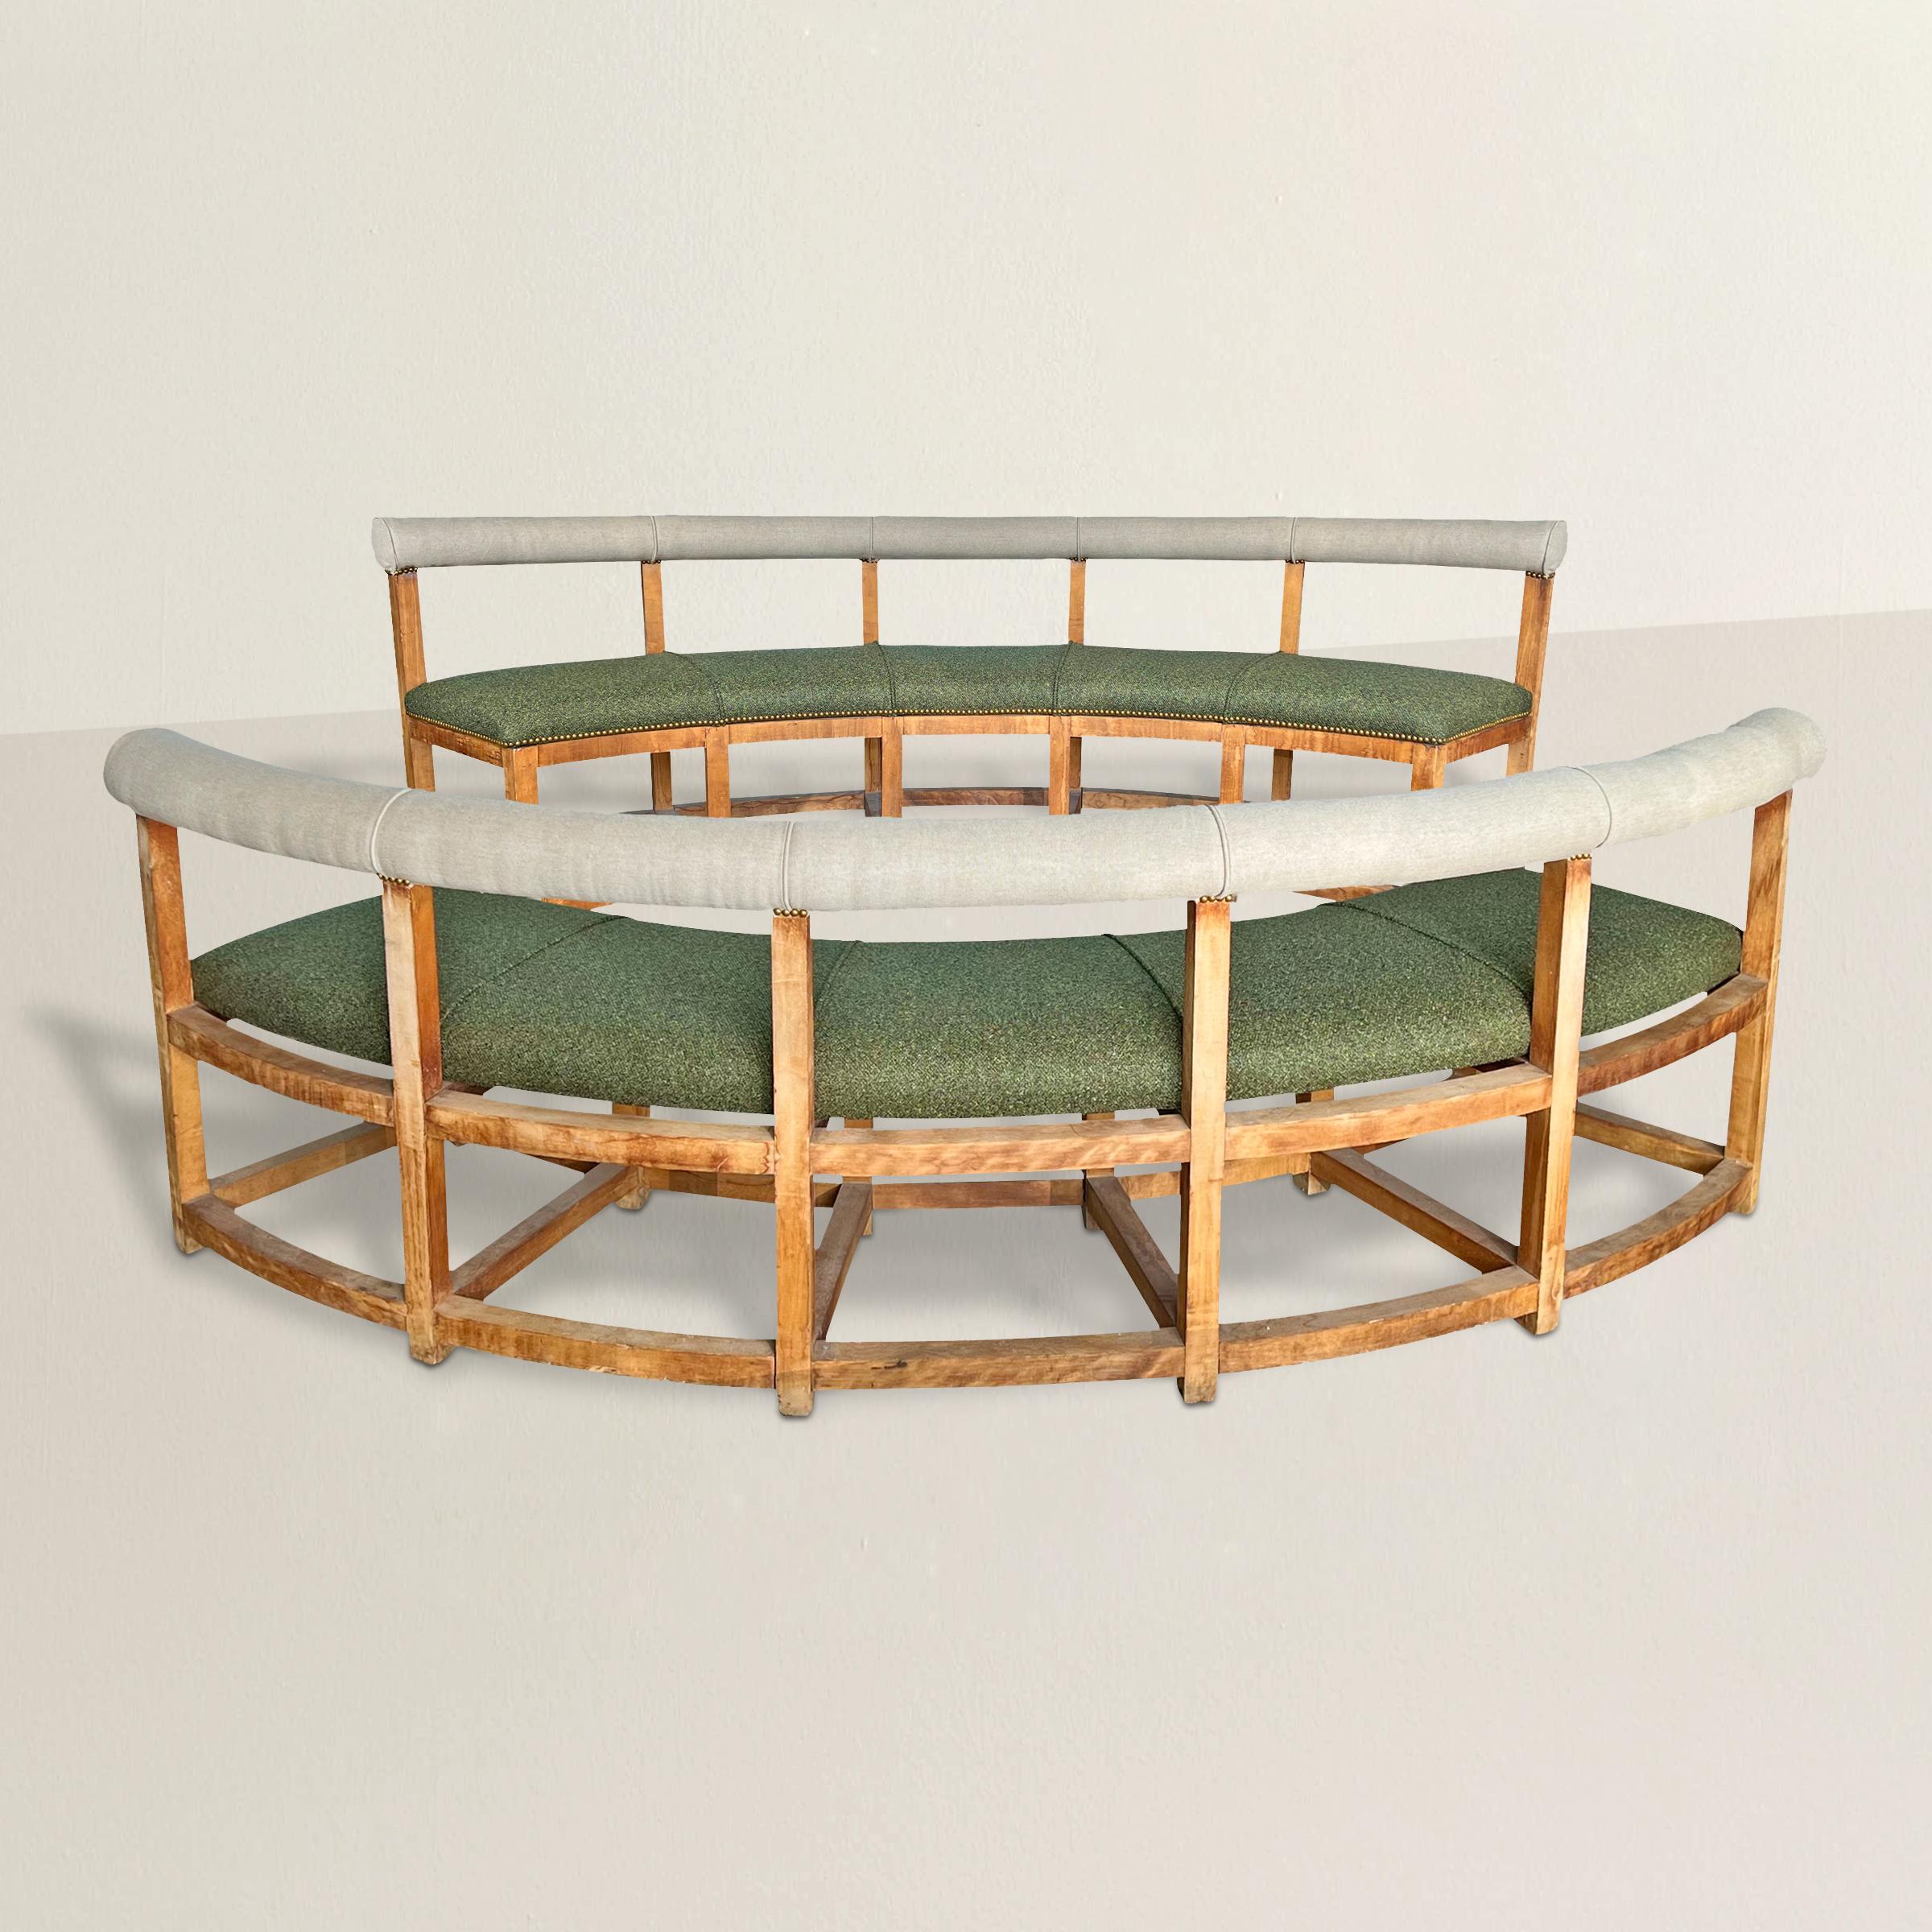 These exquisite 20th century American Modernist curved benches, originating from an Arts and Crafts house in upstate New York, tell a story of both form and function. Their simple yet sculptural architectural frames are a testament to the modernist